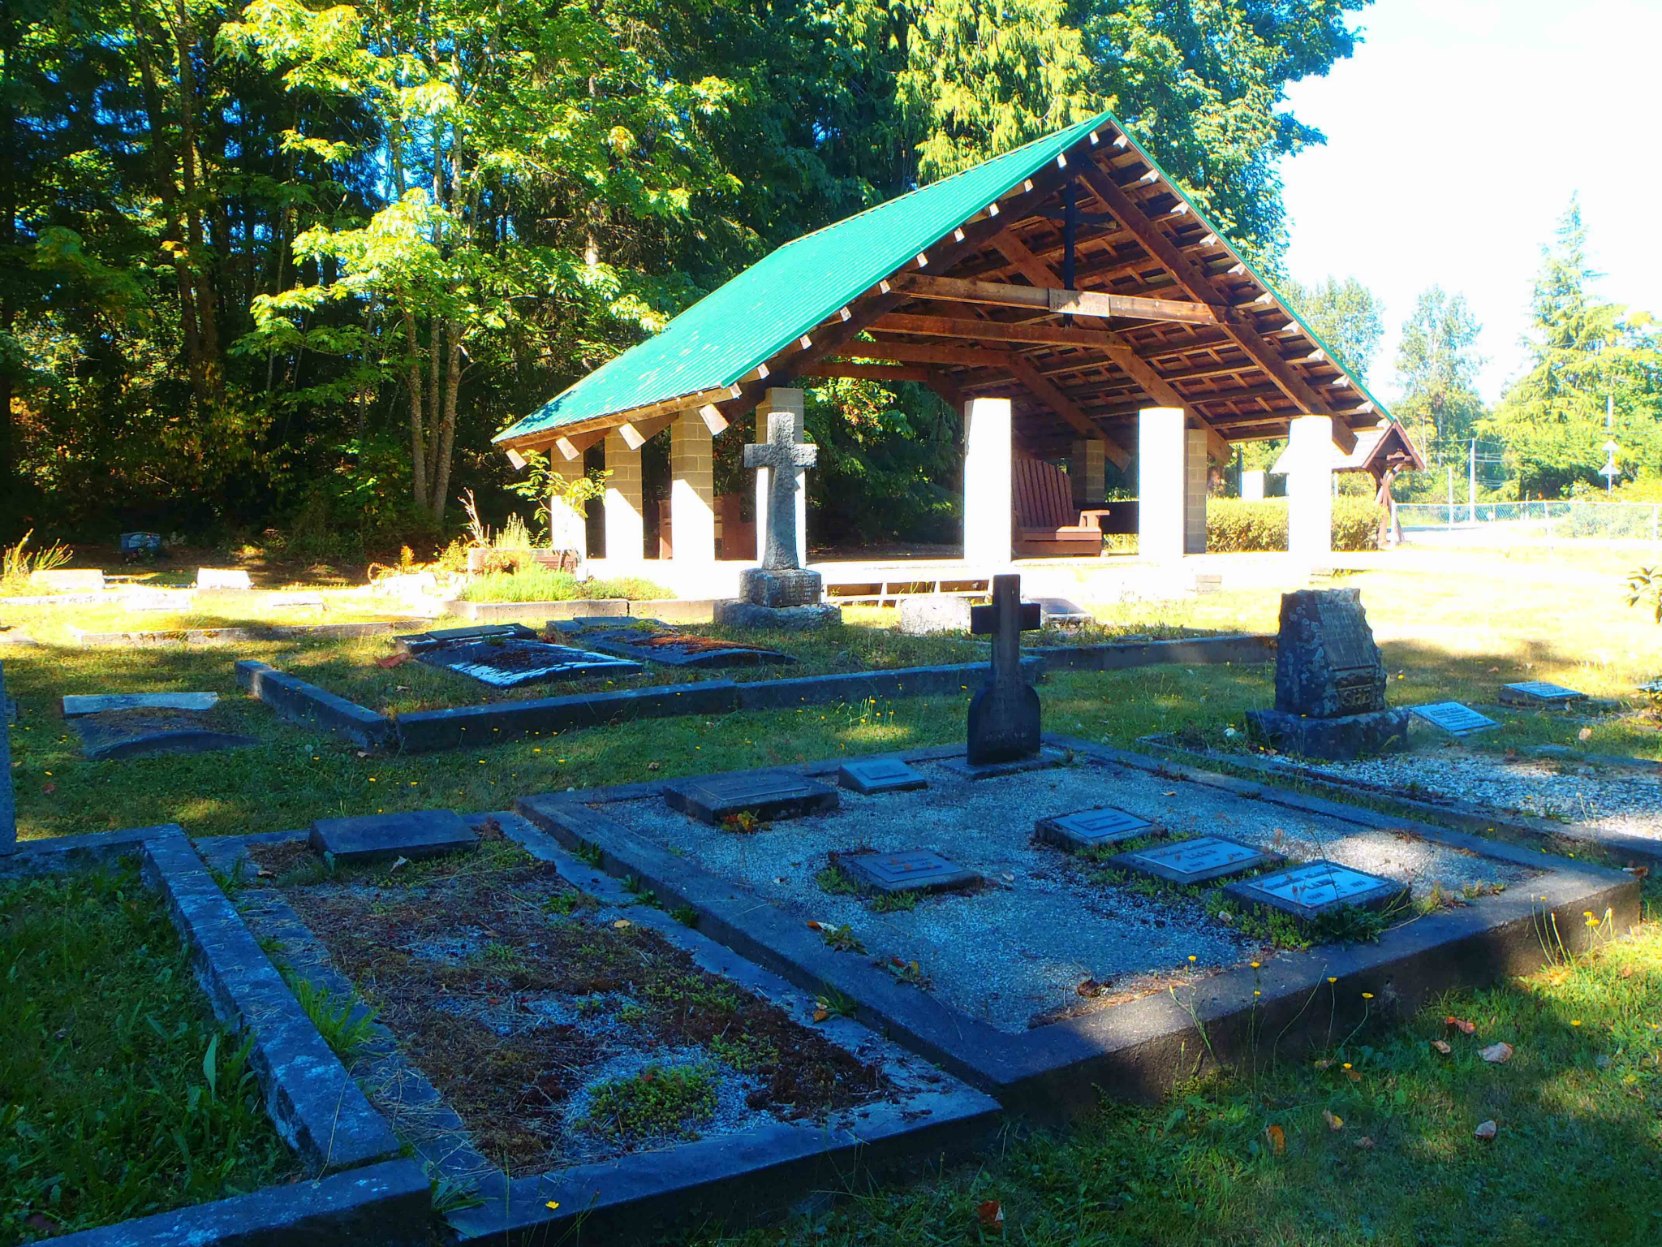 This shelter now stands on the site of the former Anglican church at All Saints Anglican Cemetery, Westholme, B.C.